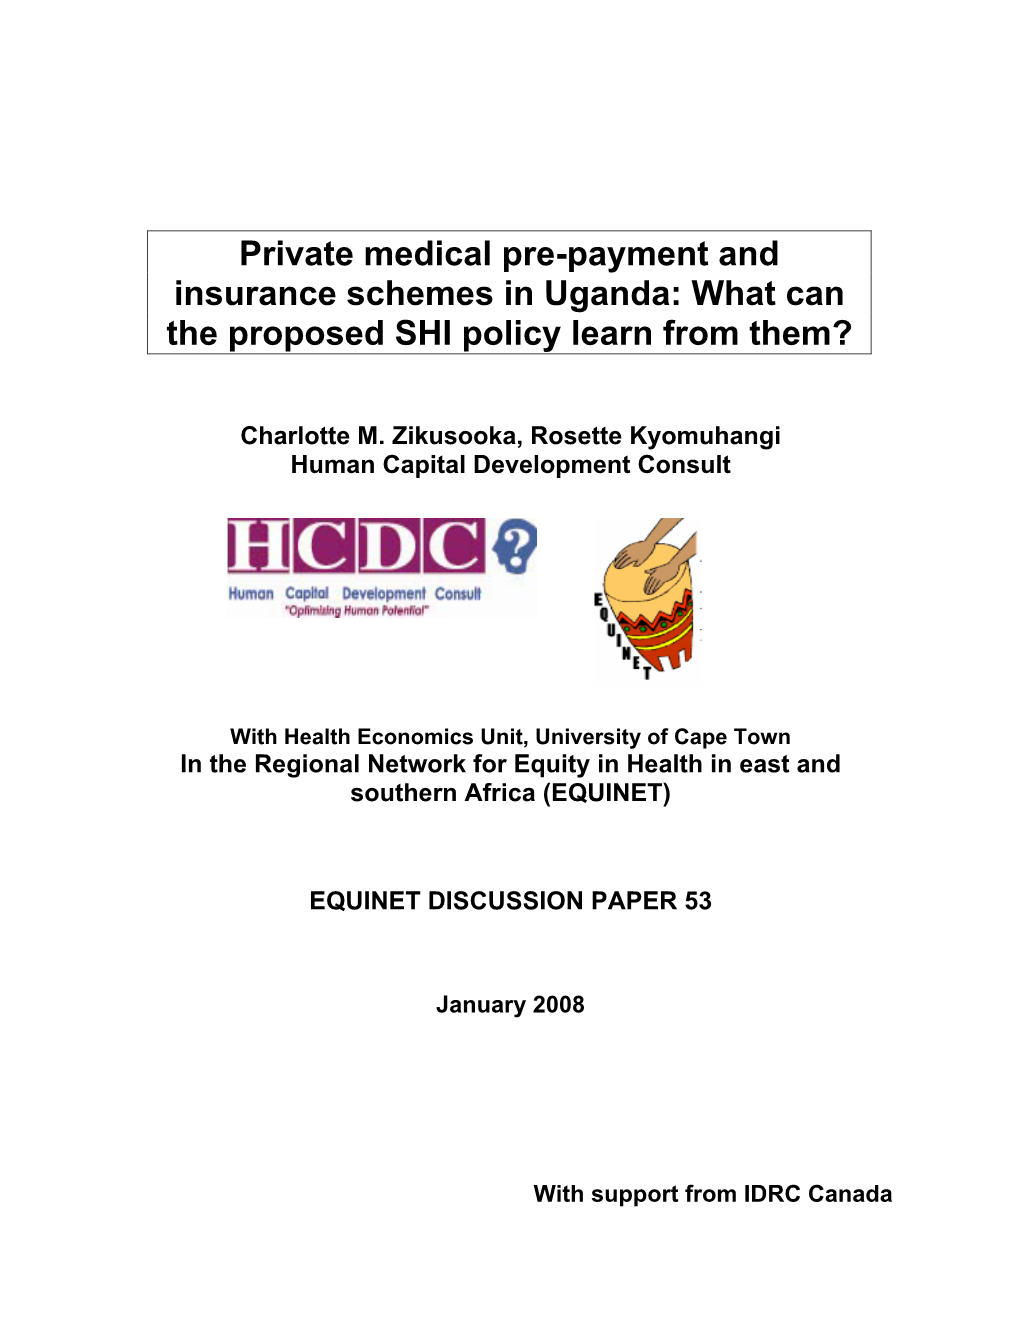 Private Medical Pre-Payment and Insurance Schemes in Uganda: What Can the Proposed SHI Policy Learn from Them?